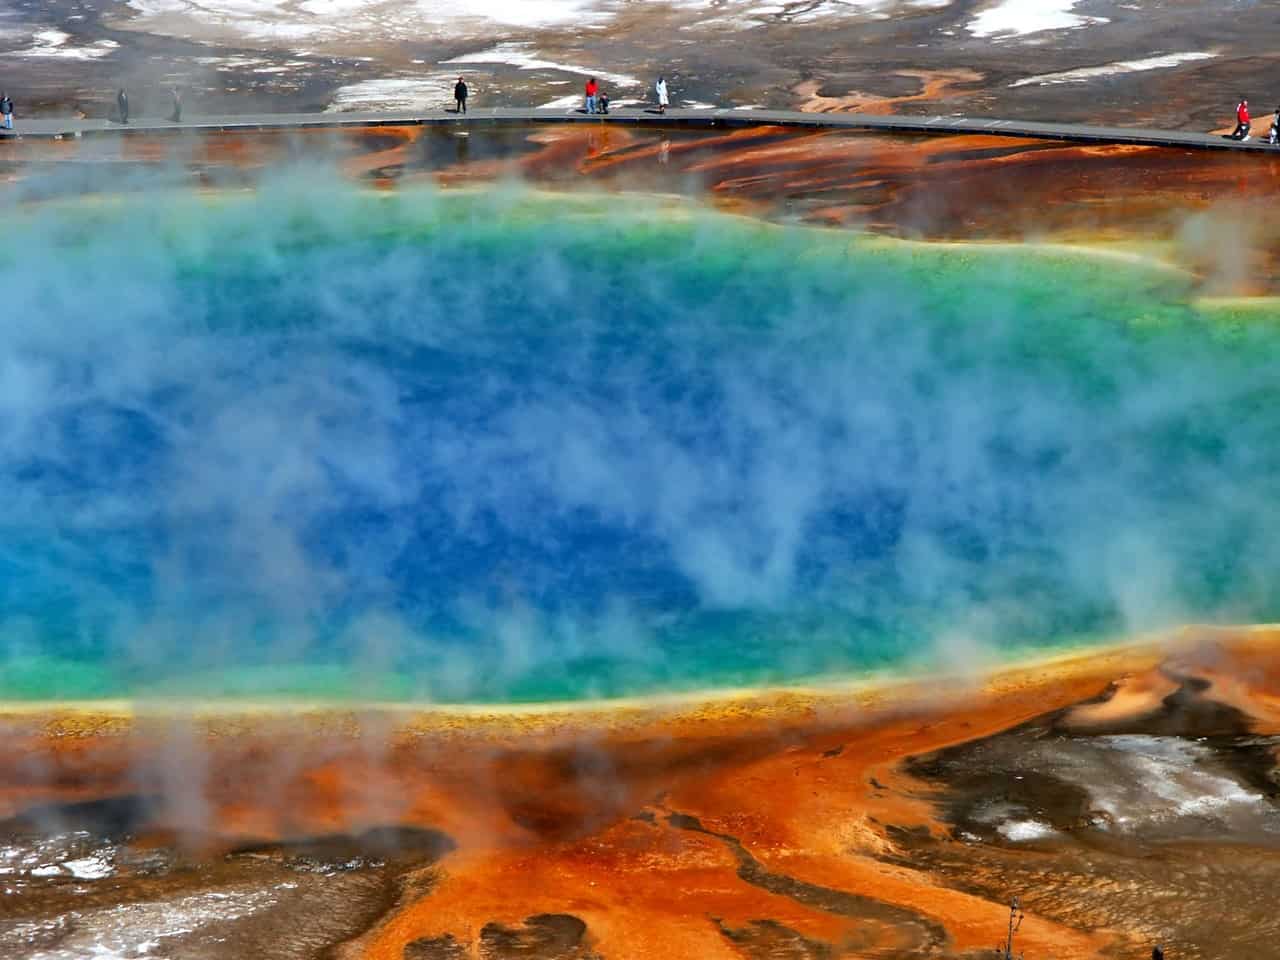 Natural hot springs and geothermal pools often contain properties of nonmetals